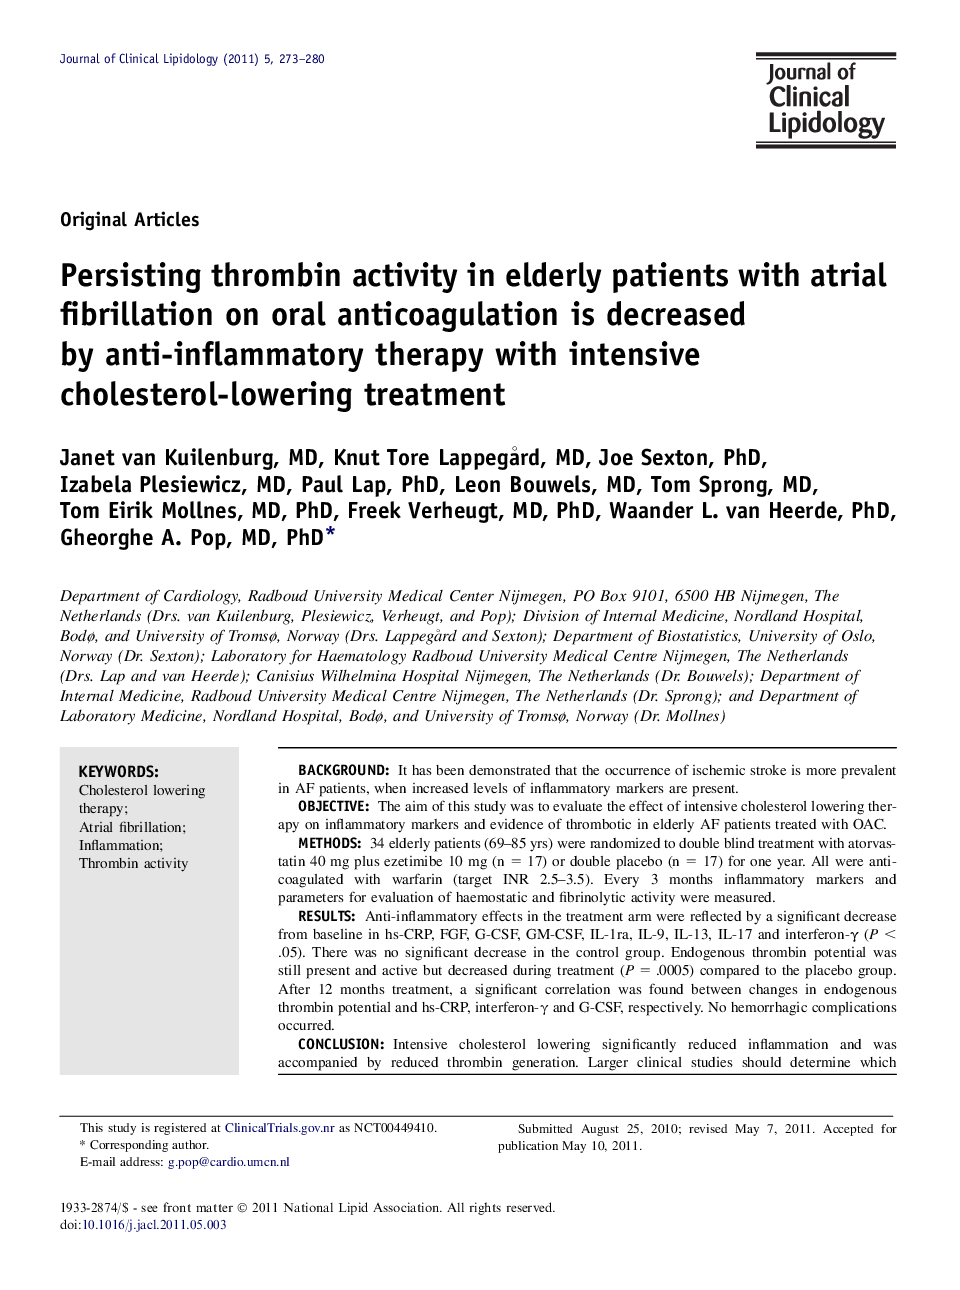 Persisting thrombin activity in elderly patients with atrial fibrillation on oral anticoagulation is decreased by anti-inflammatory therapy with intensive cholesterol-lowering treatment 